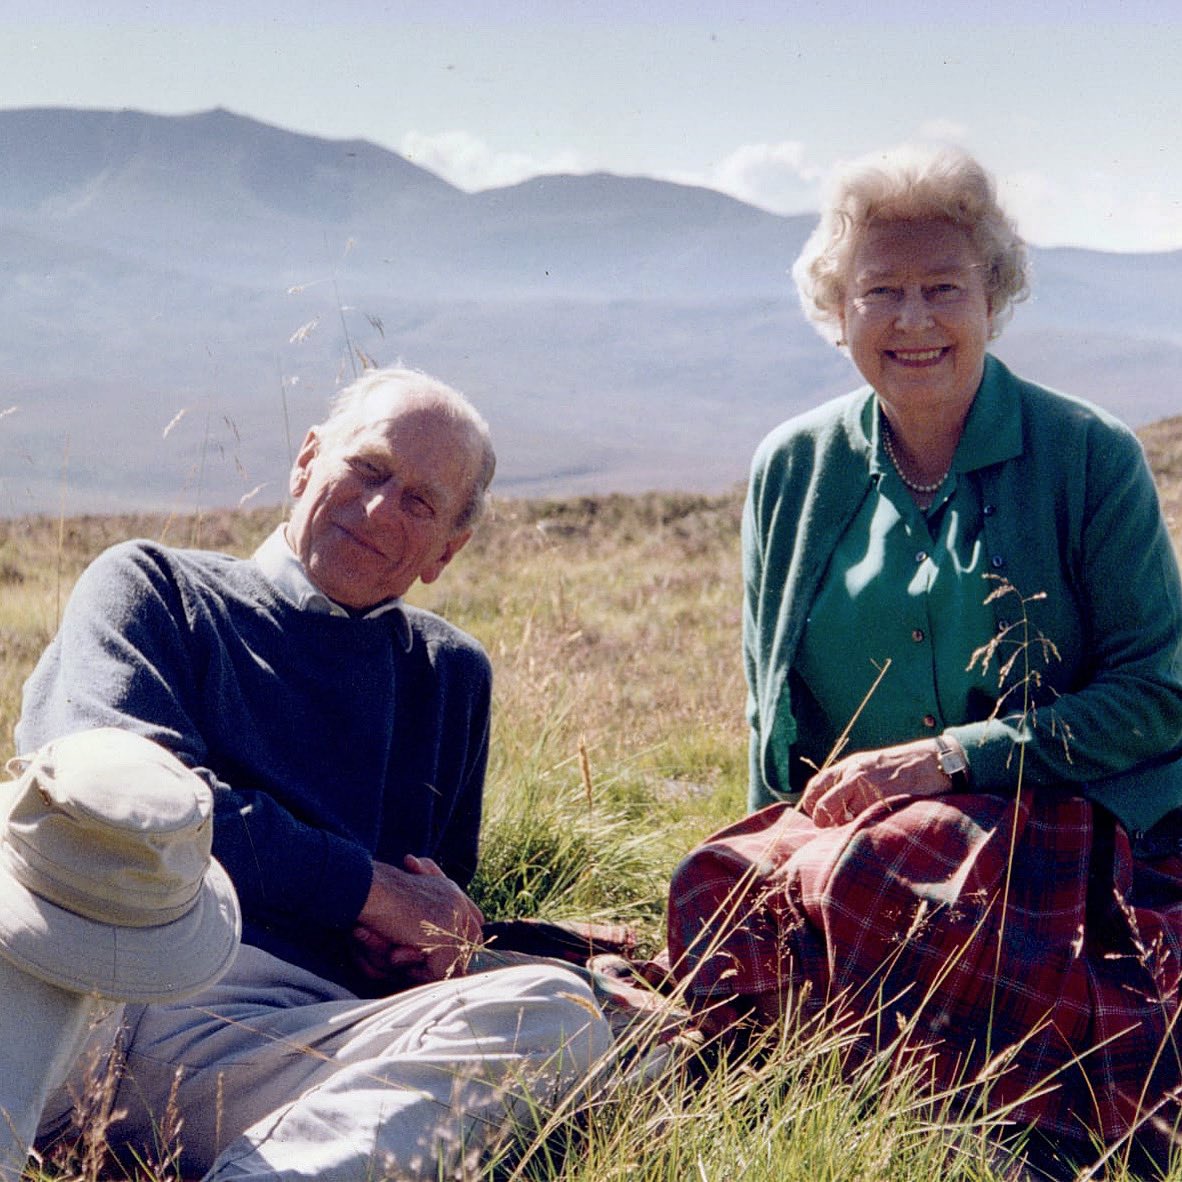 The Queen wishes to share this private photograph taken with The Duke of Edinburgh at the top of the Coyles of Muick, Scotland in 2003.

📷Photograph by The Countess of Wessex.